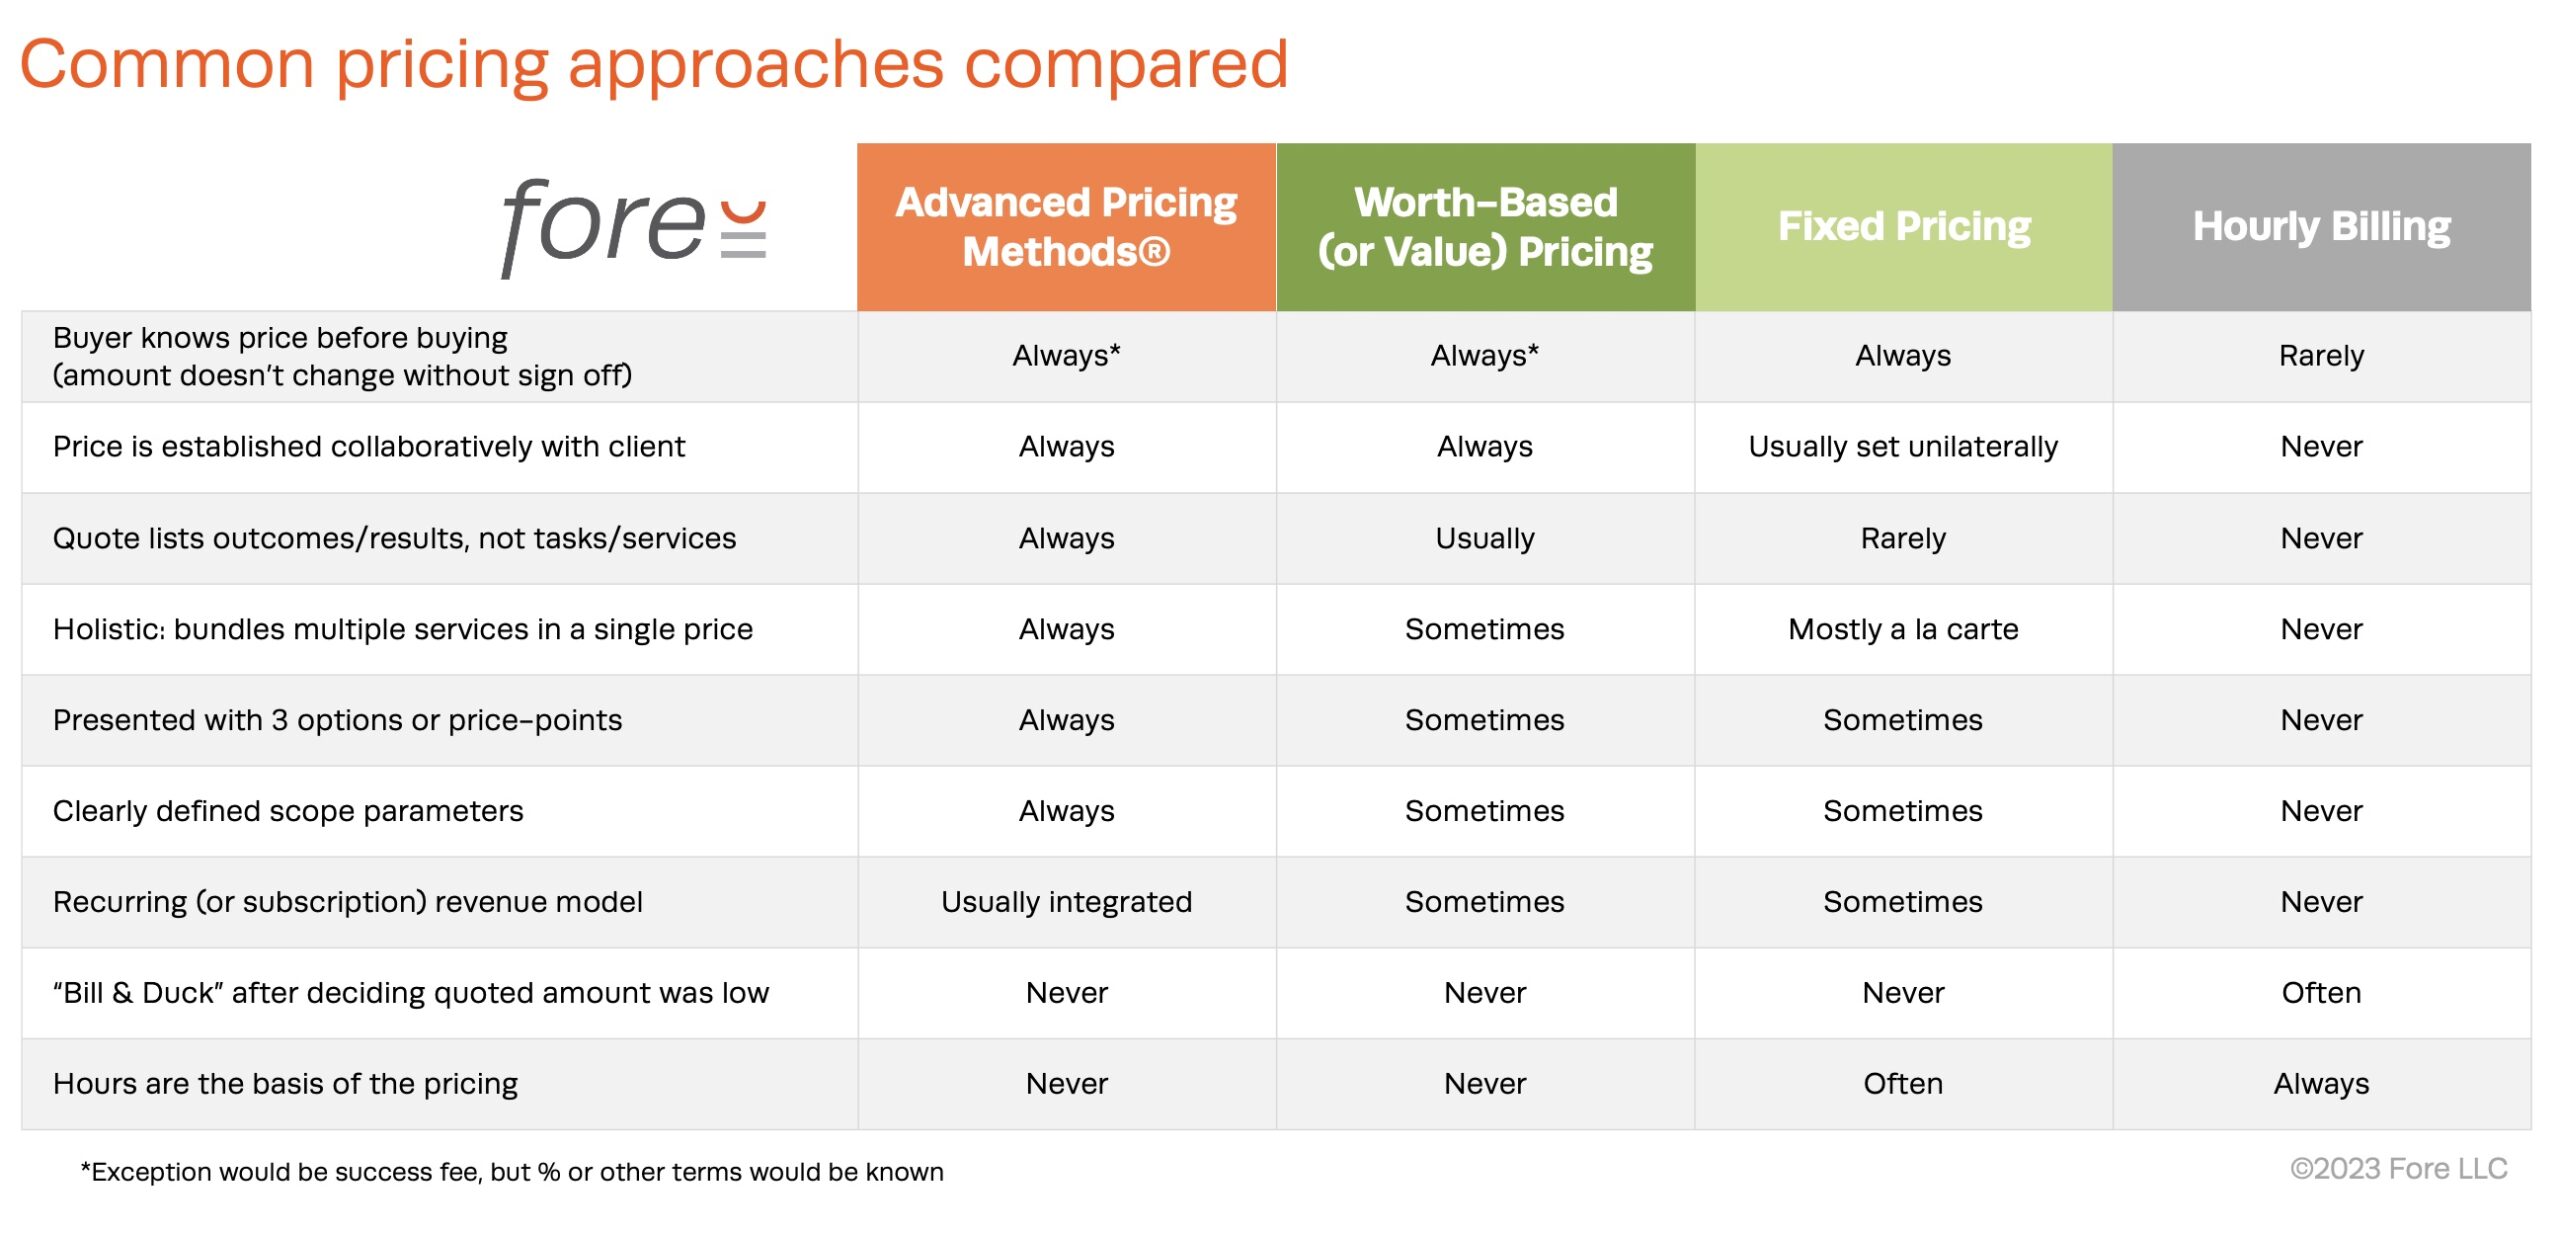 Chart to compare pricing approach characteristics